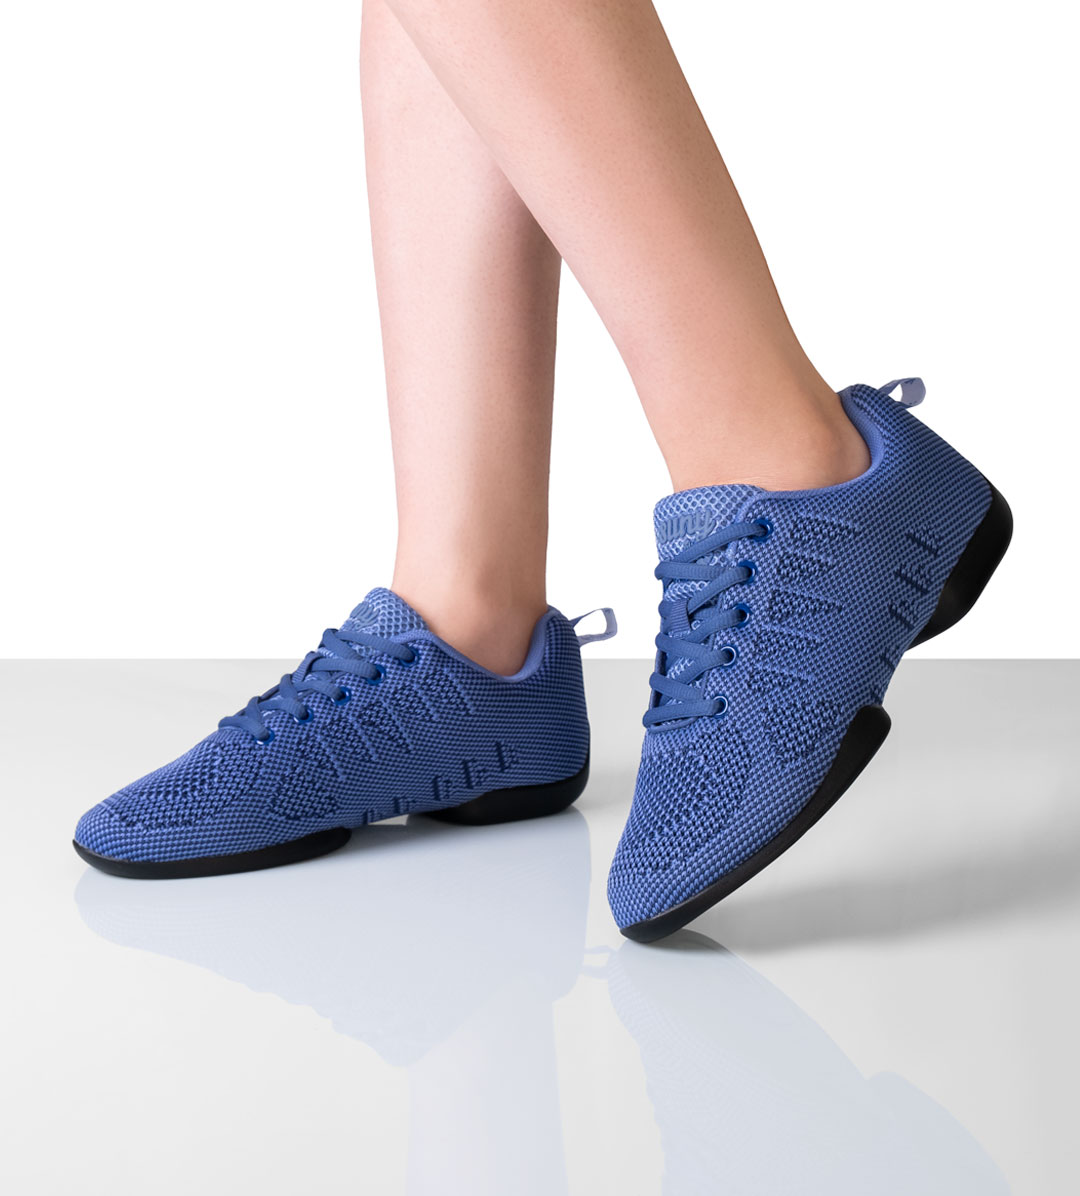 Women's dance sneaker 185 in Light Blue by Suny by Anna Kern, made of fine knitting material with split sole, ideal for dancing on all floors.